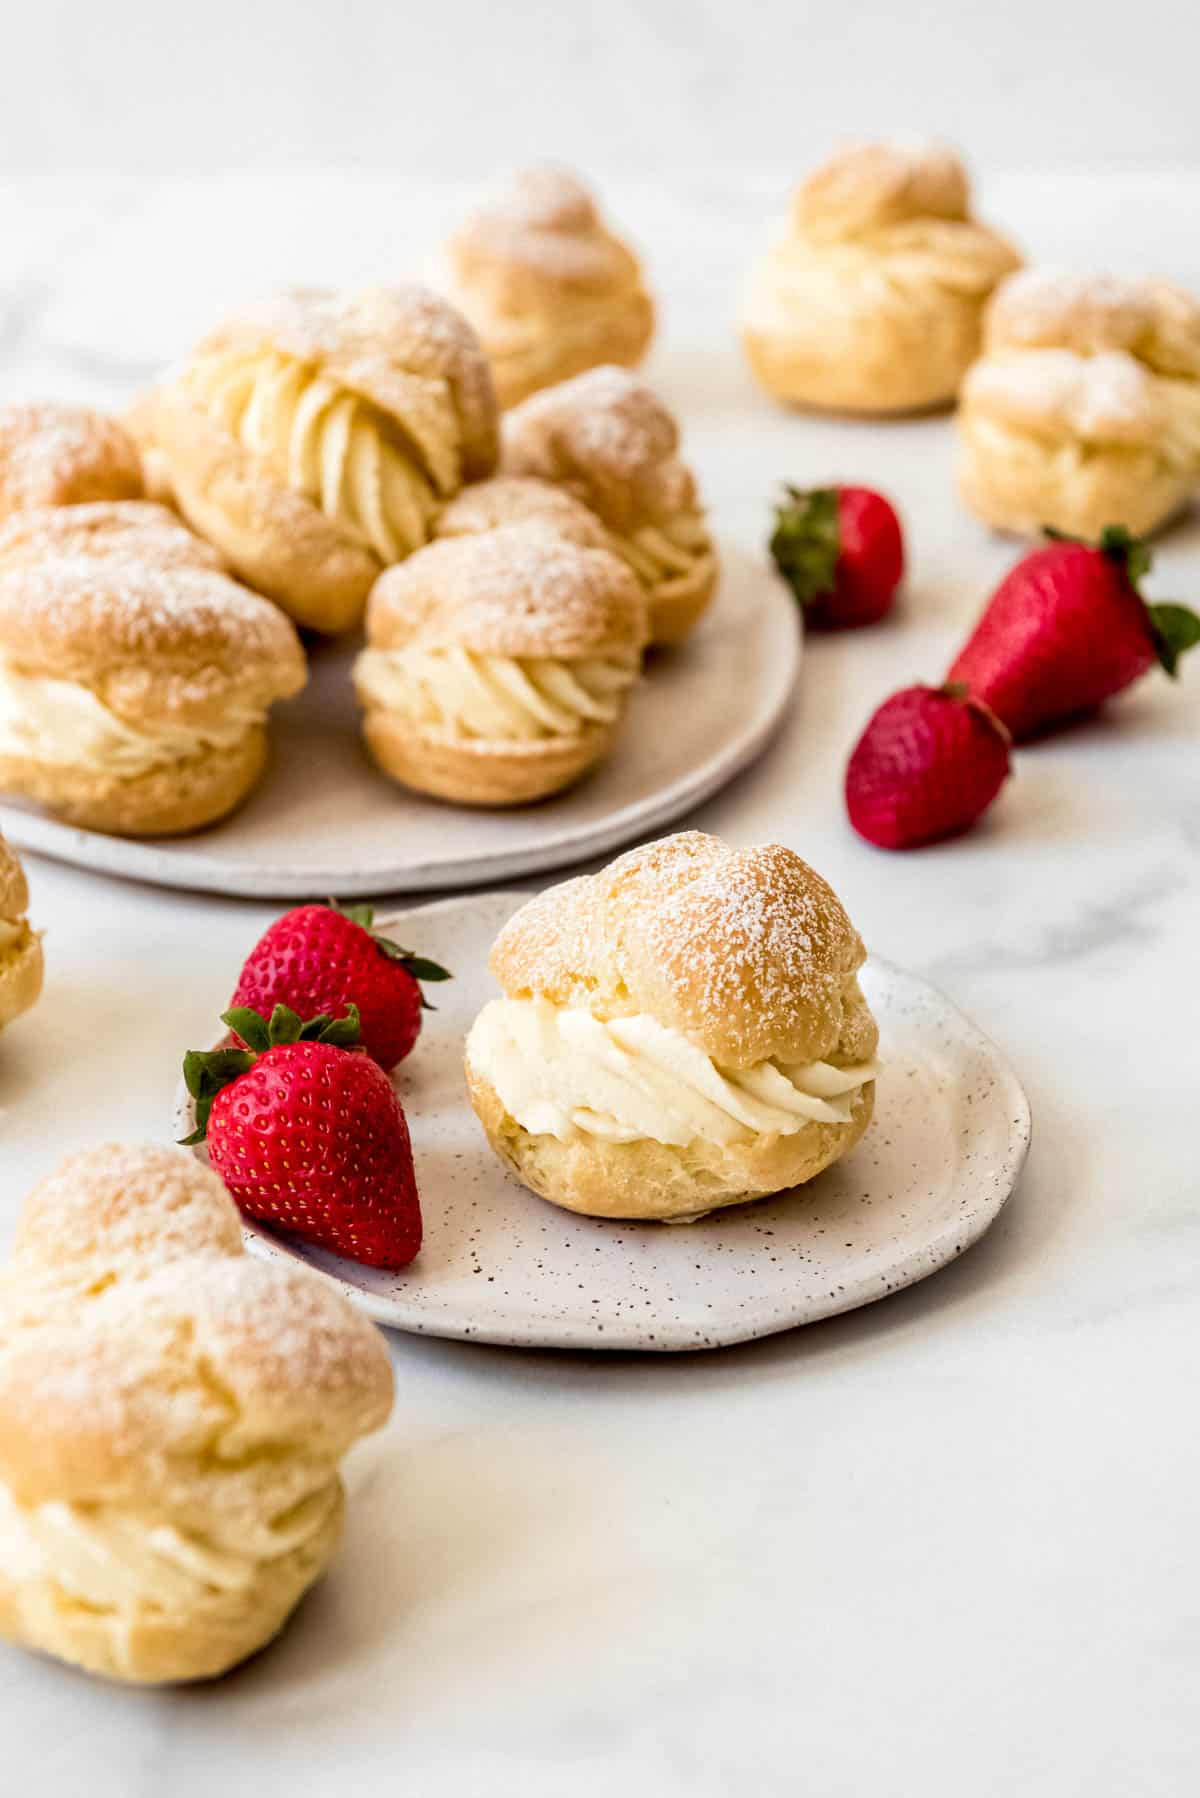 A cream puff on a plate with two strawberries next to more cream puffs.